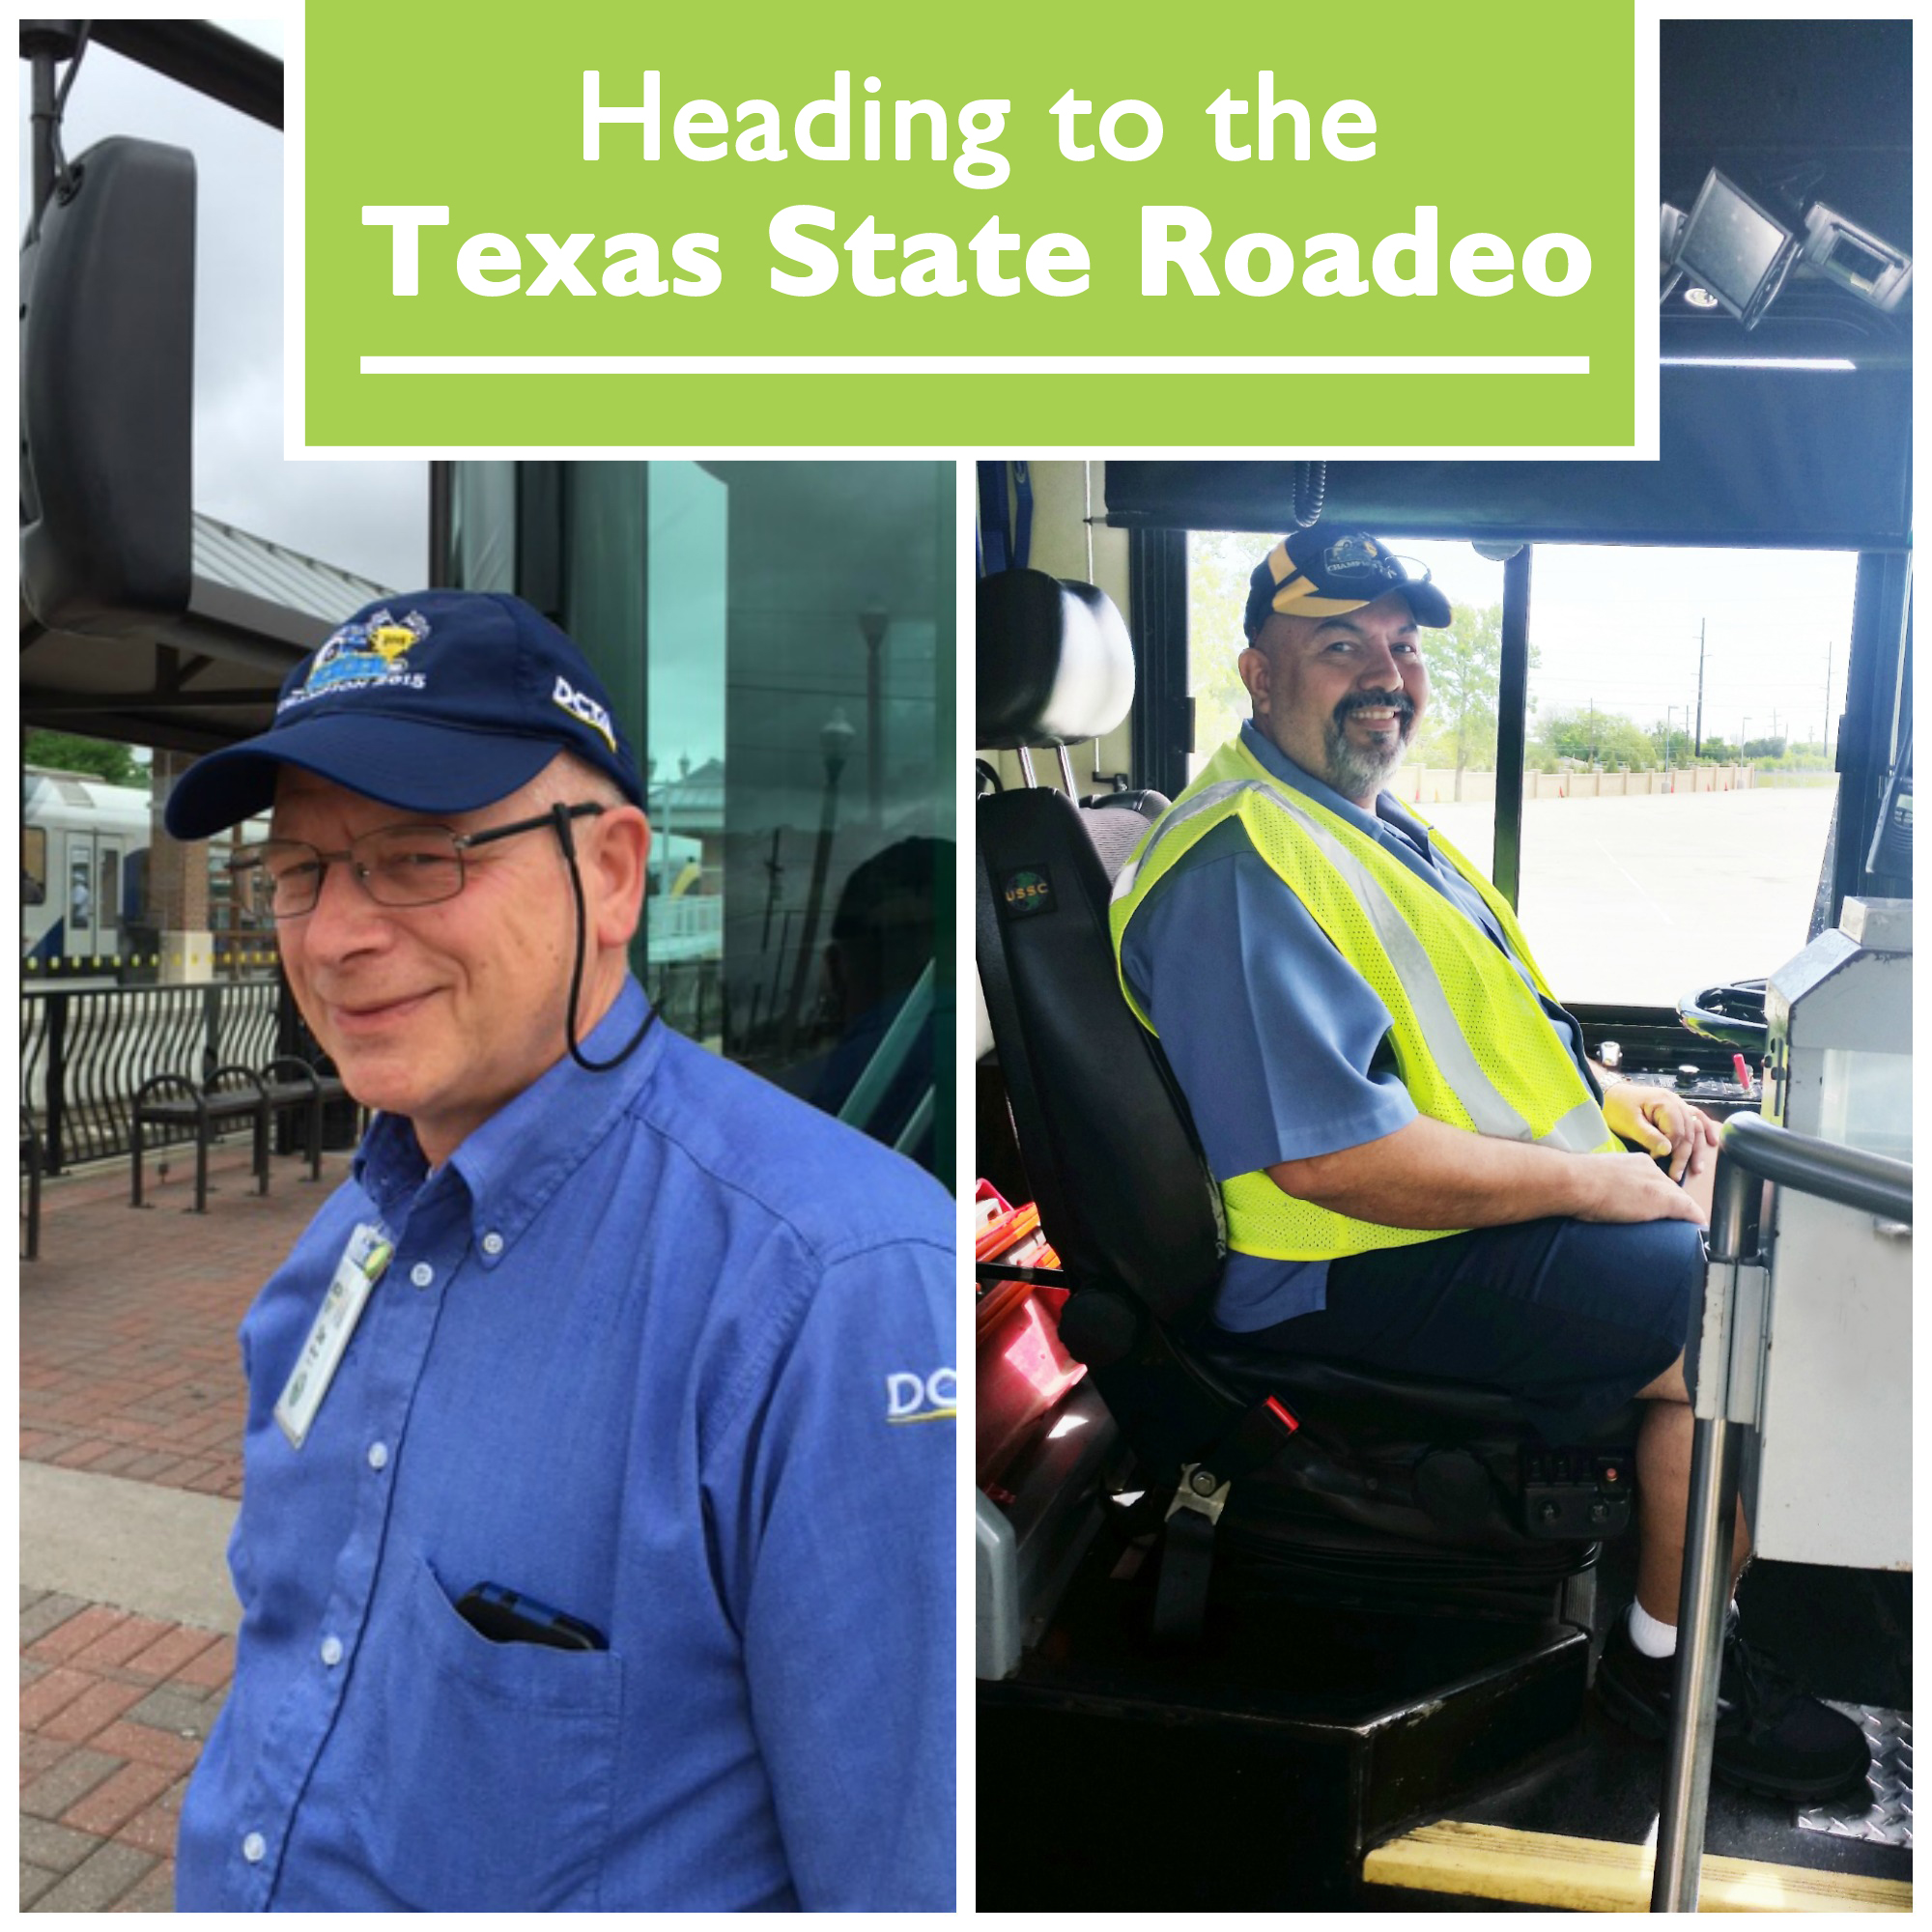 DCTA Bus Operators to Compete in 2016 Texas State Roadeo Competition